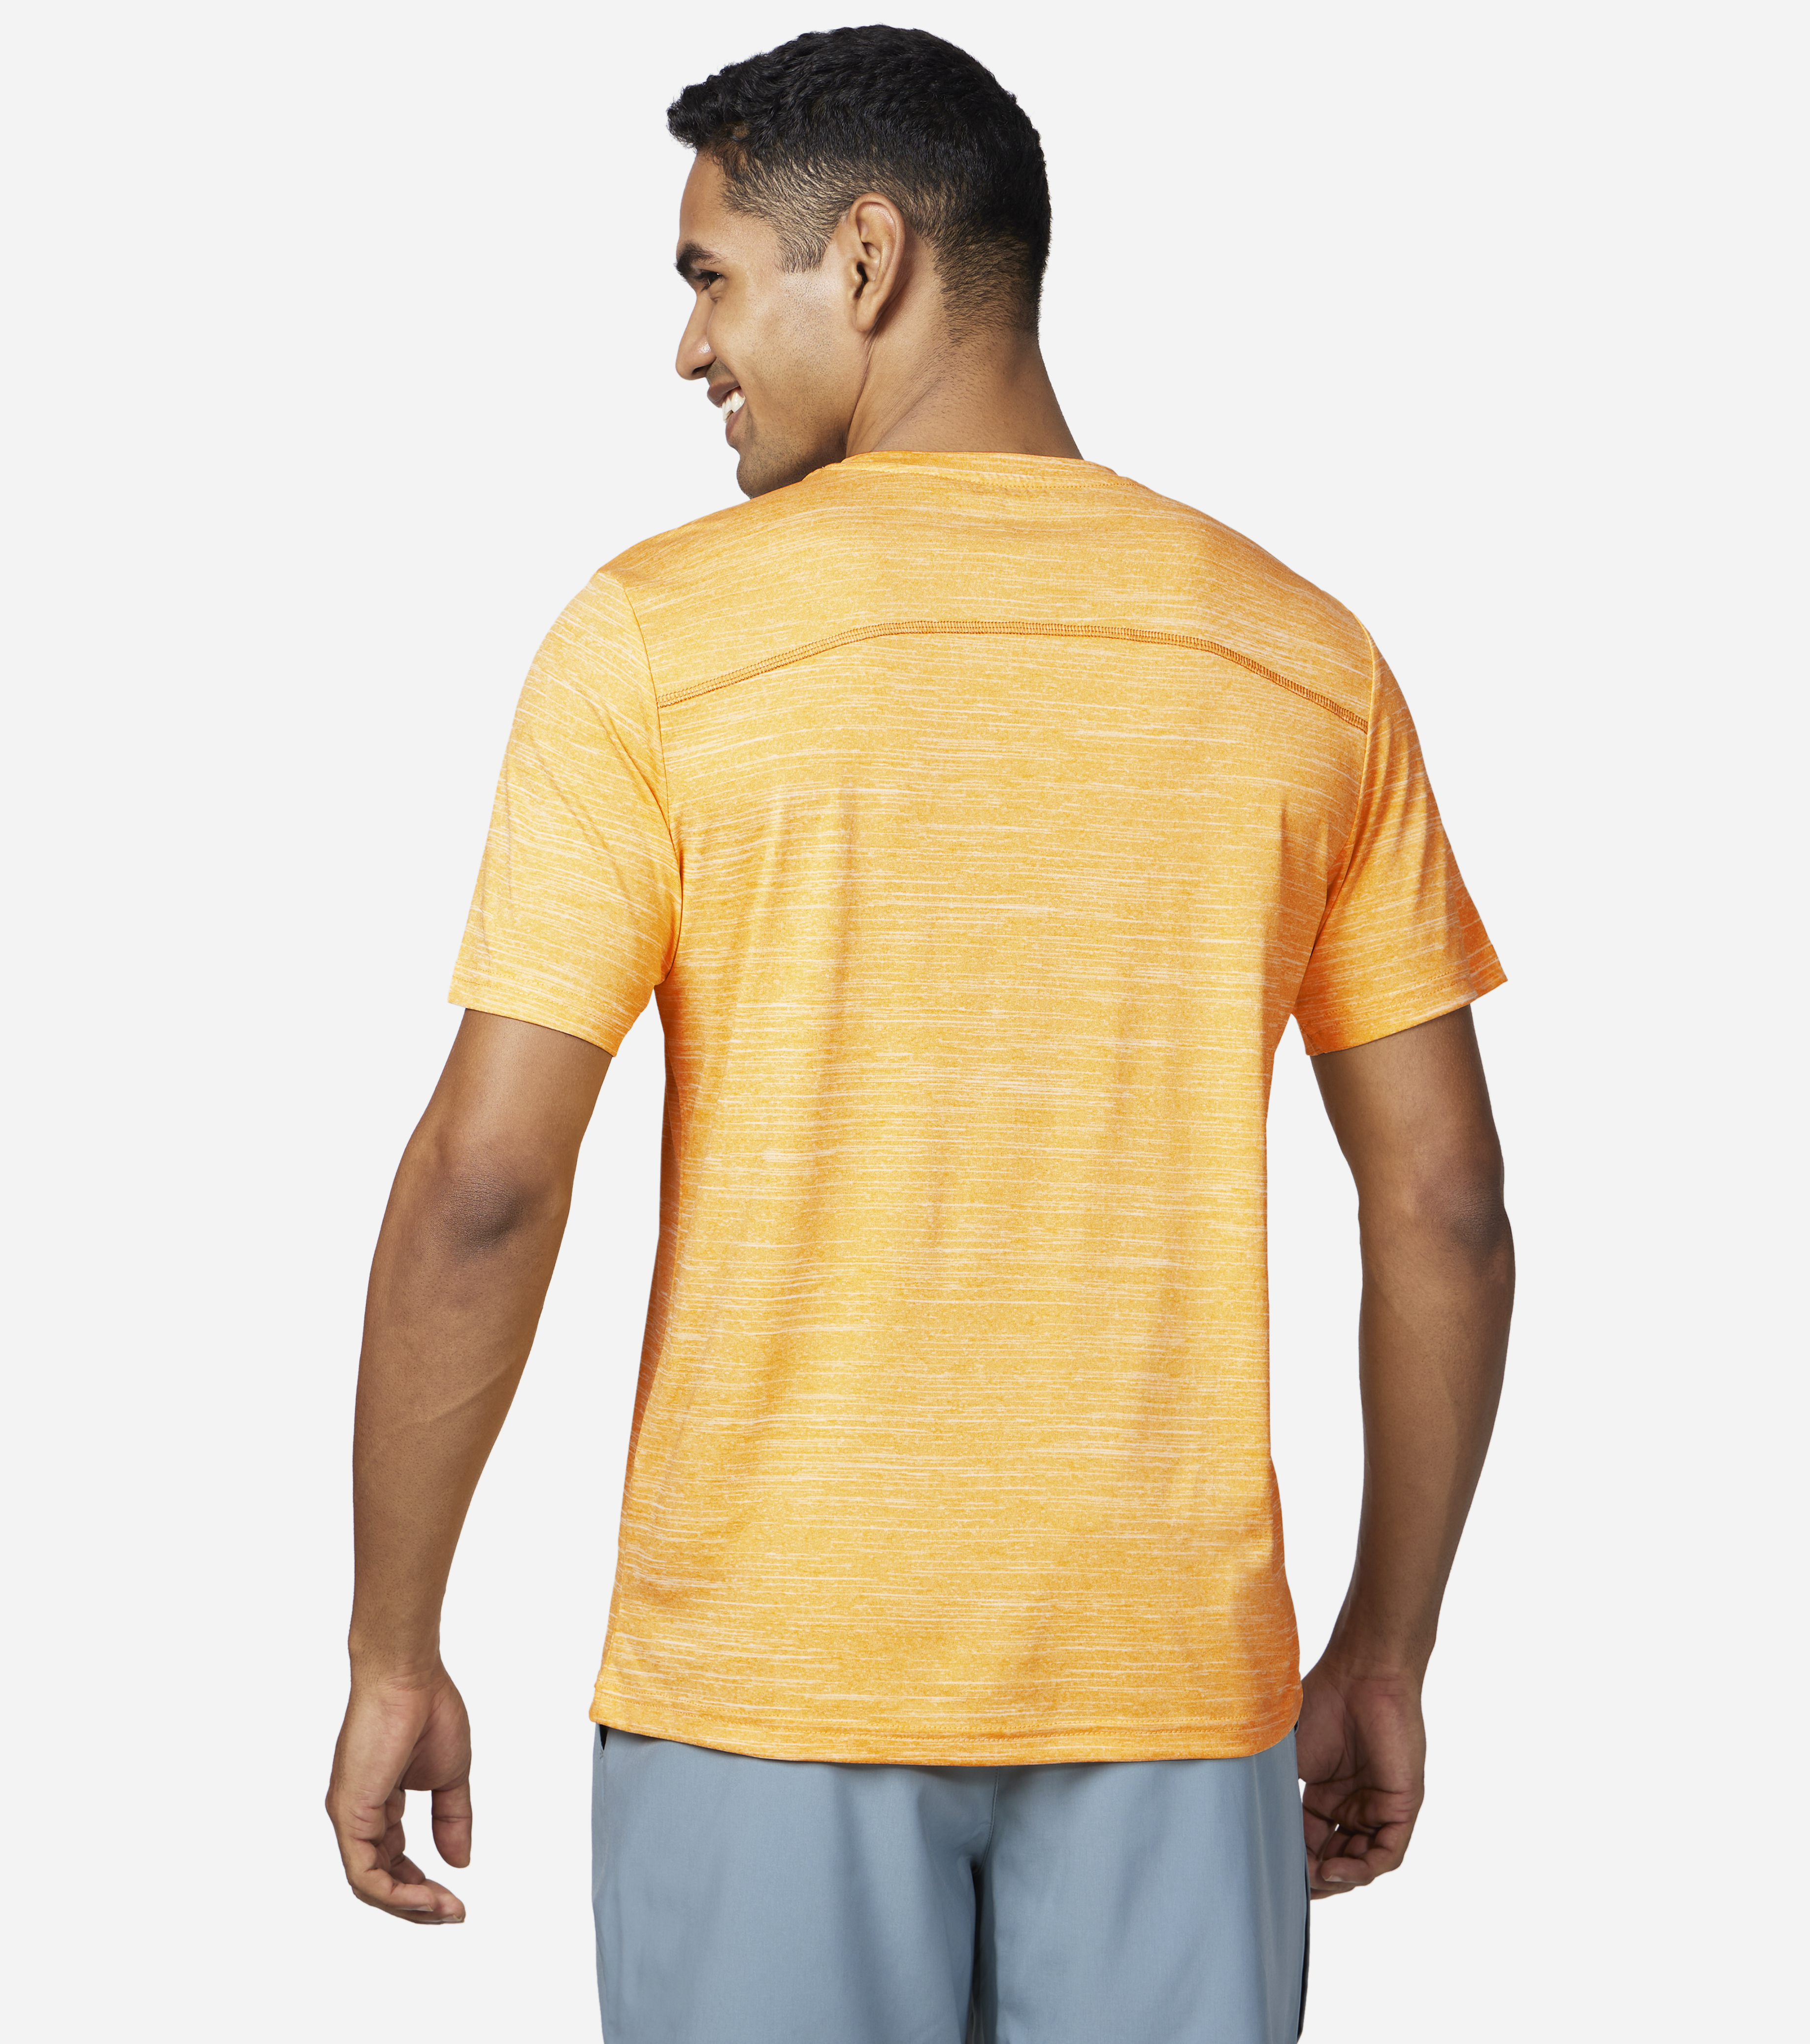  ON THE ROAD TEE,  Apparels Bottom View